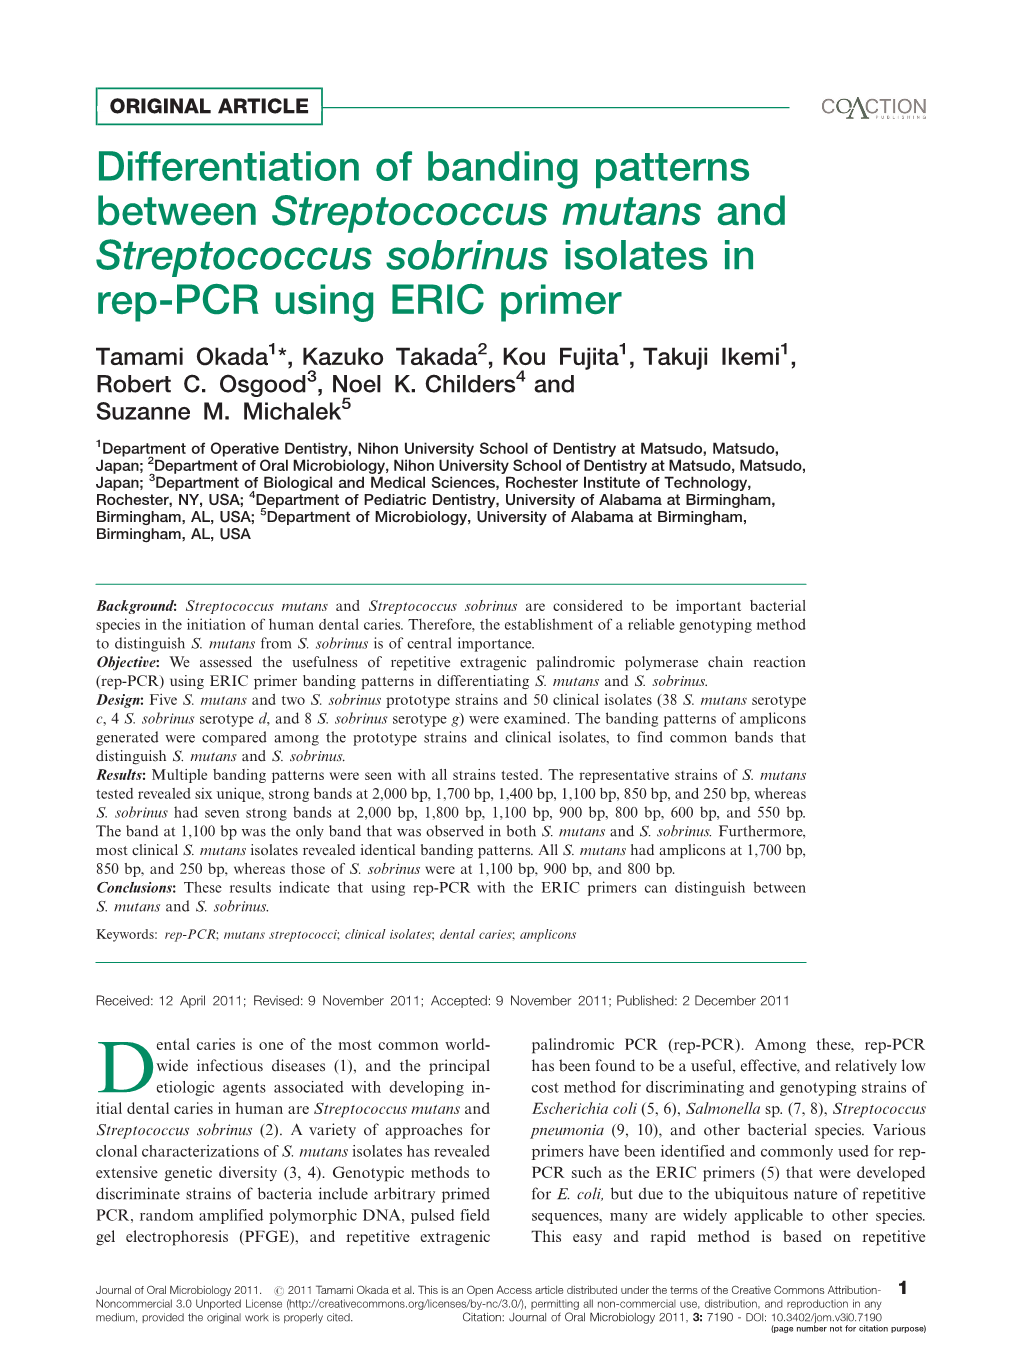 Differentiation of Banding Patterns Between Streptococcus Mutans And